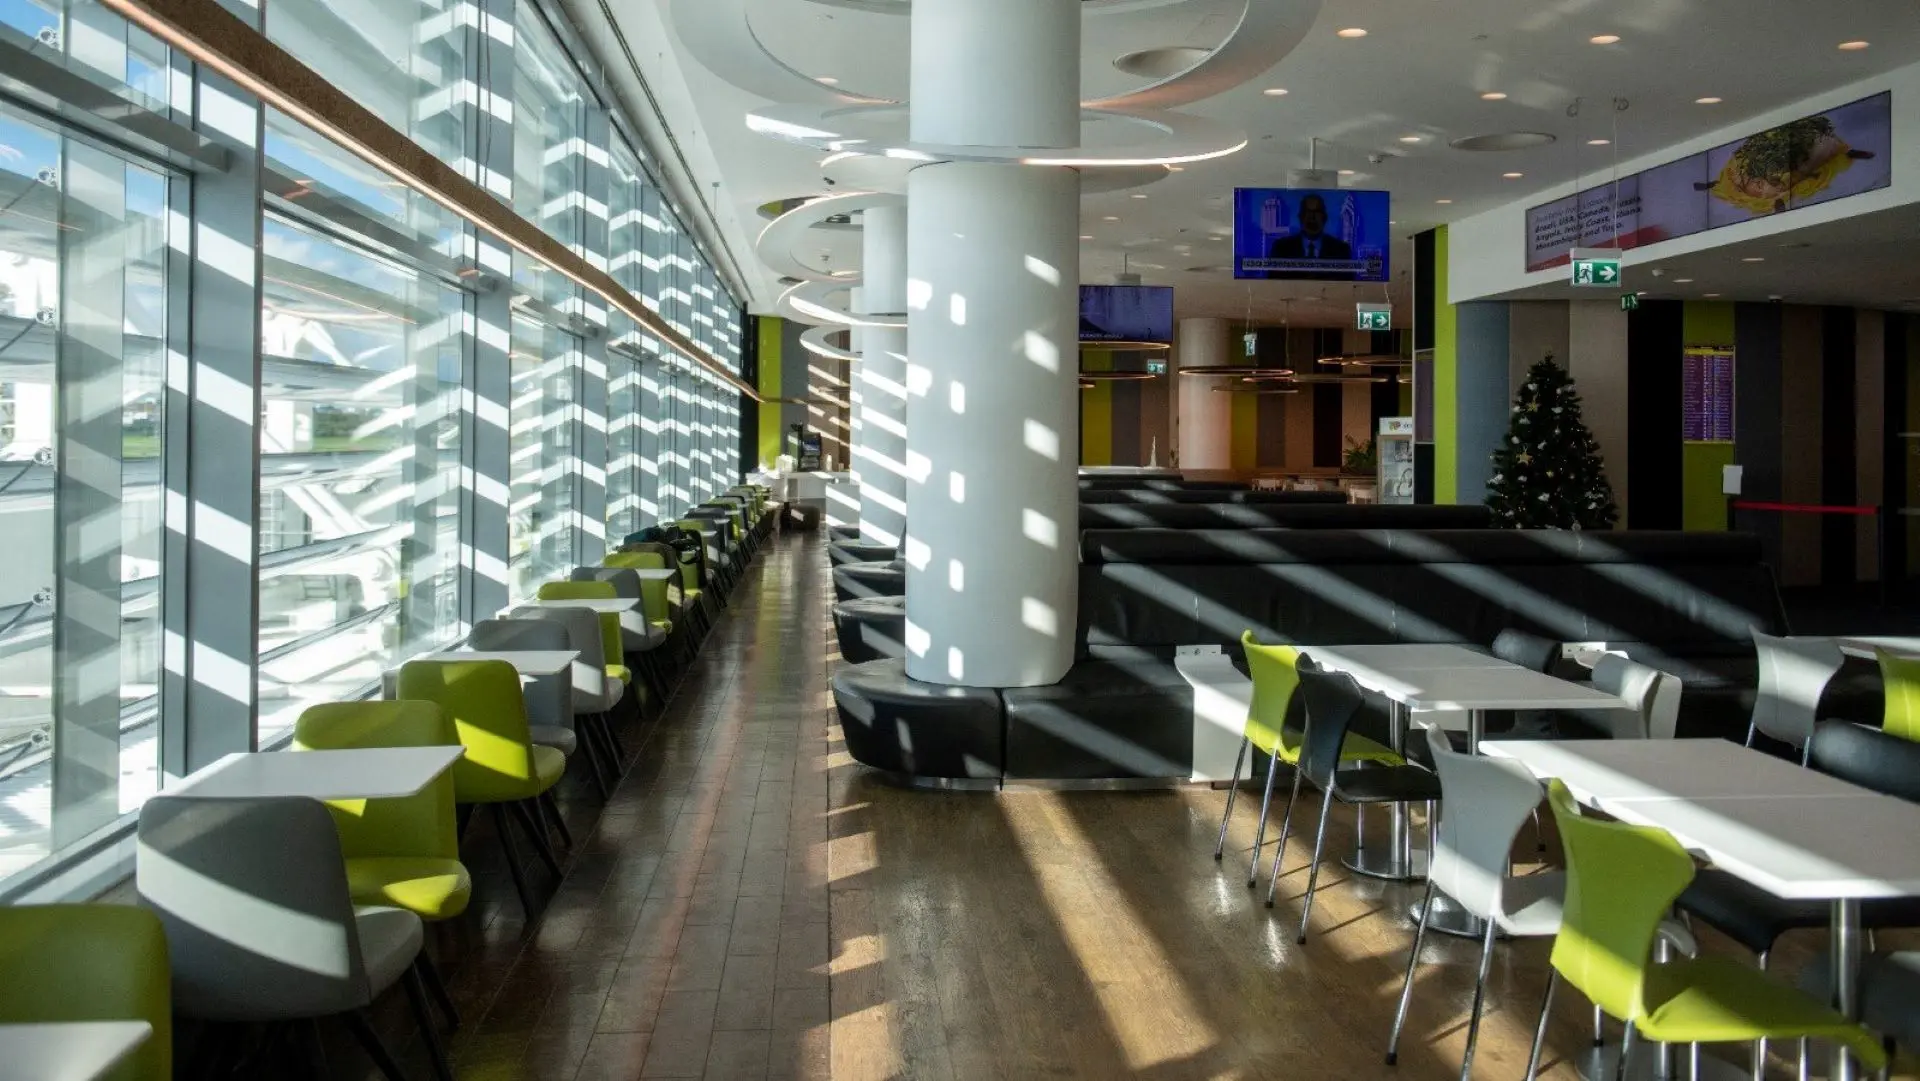 Airlines News - TAP Air Portugal unveils Premium Lounge in Lisbon